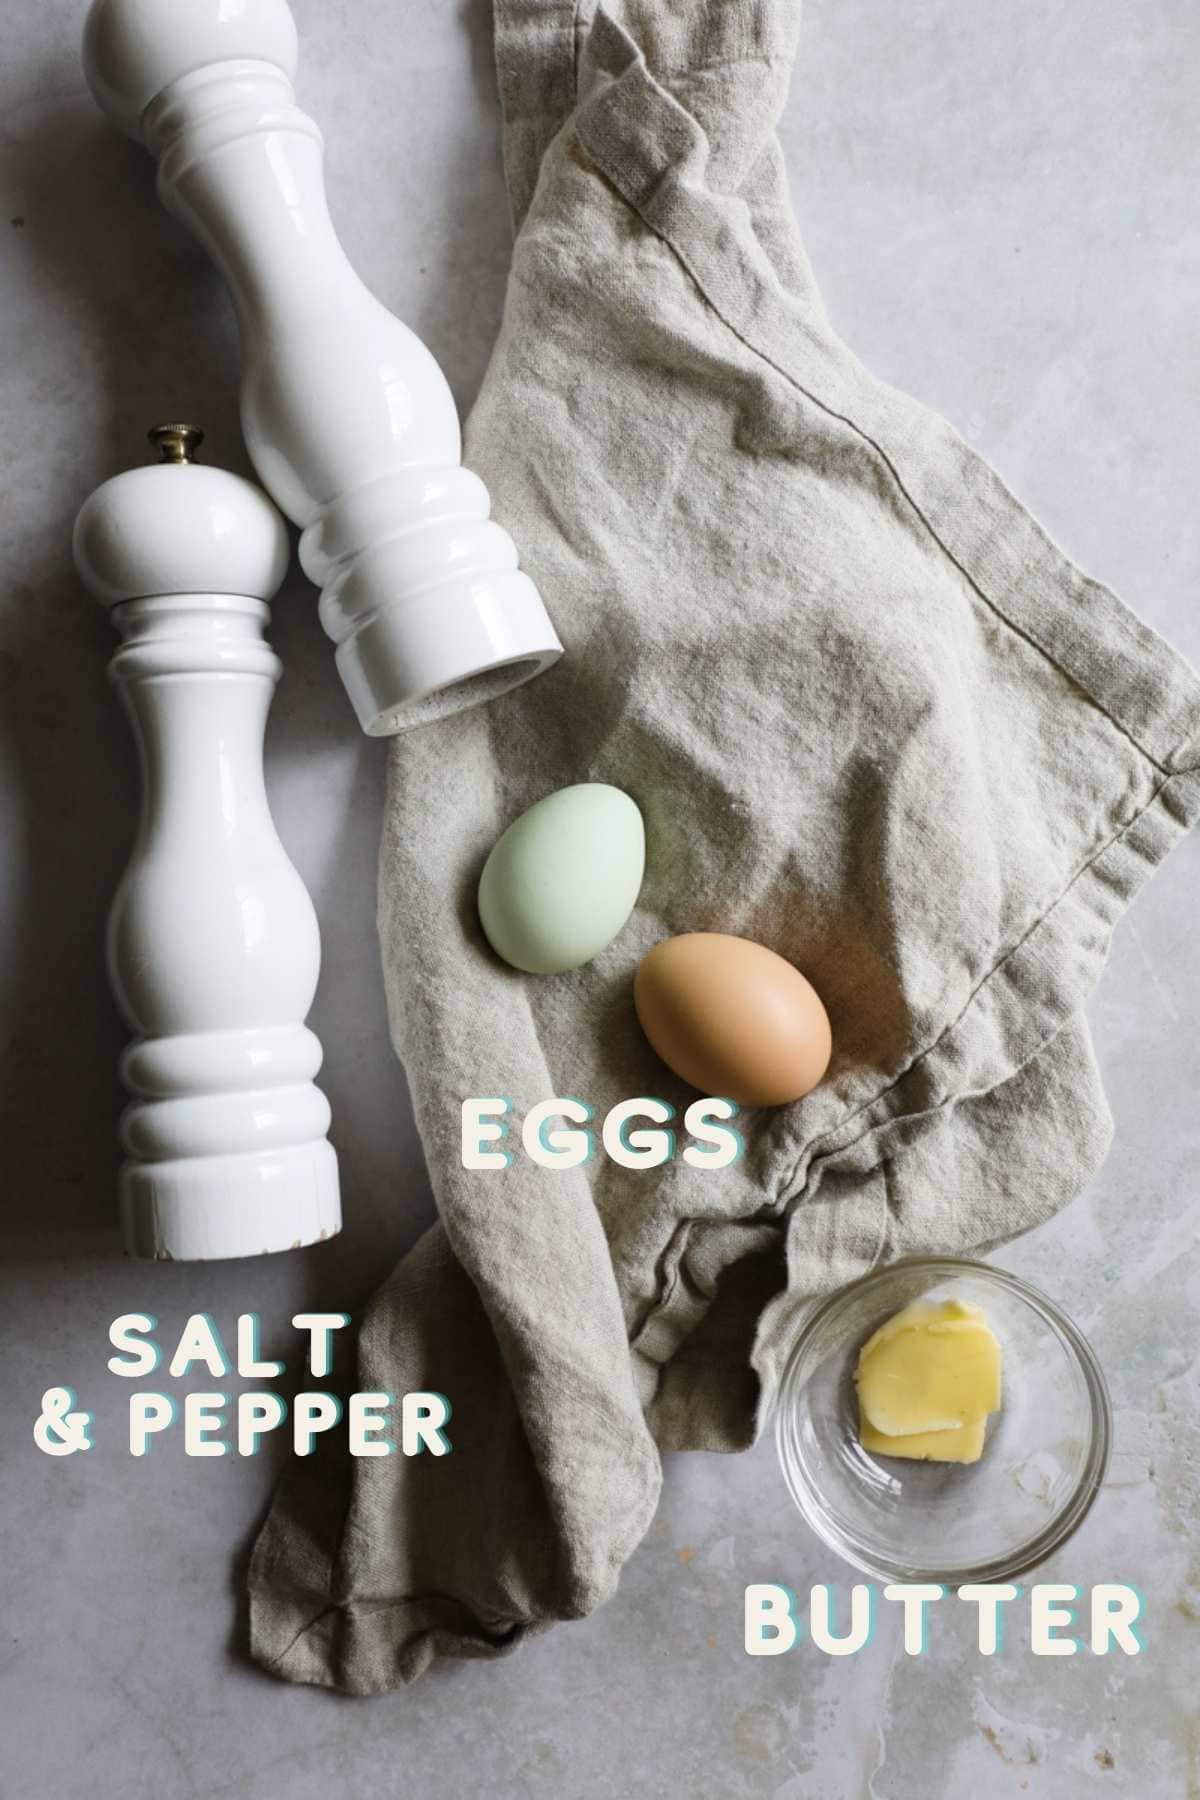 Ingredients for over easy eggs, including fresh eggs, butter, salt, and pepper.